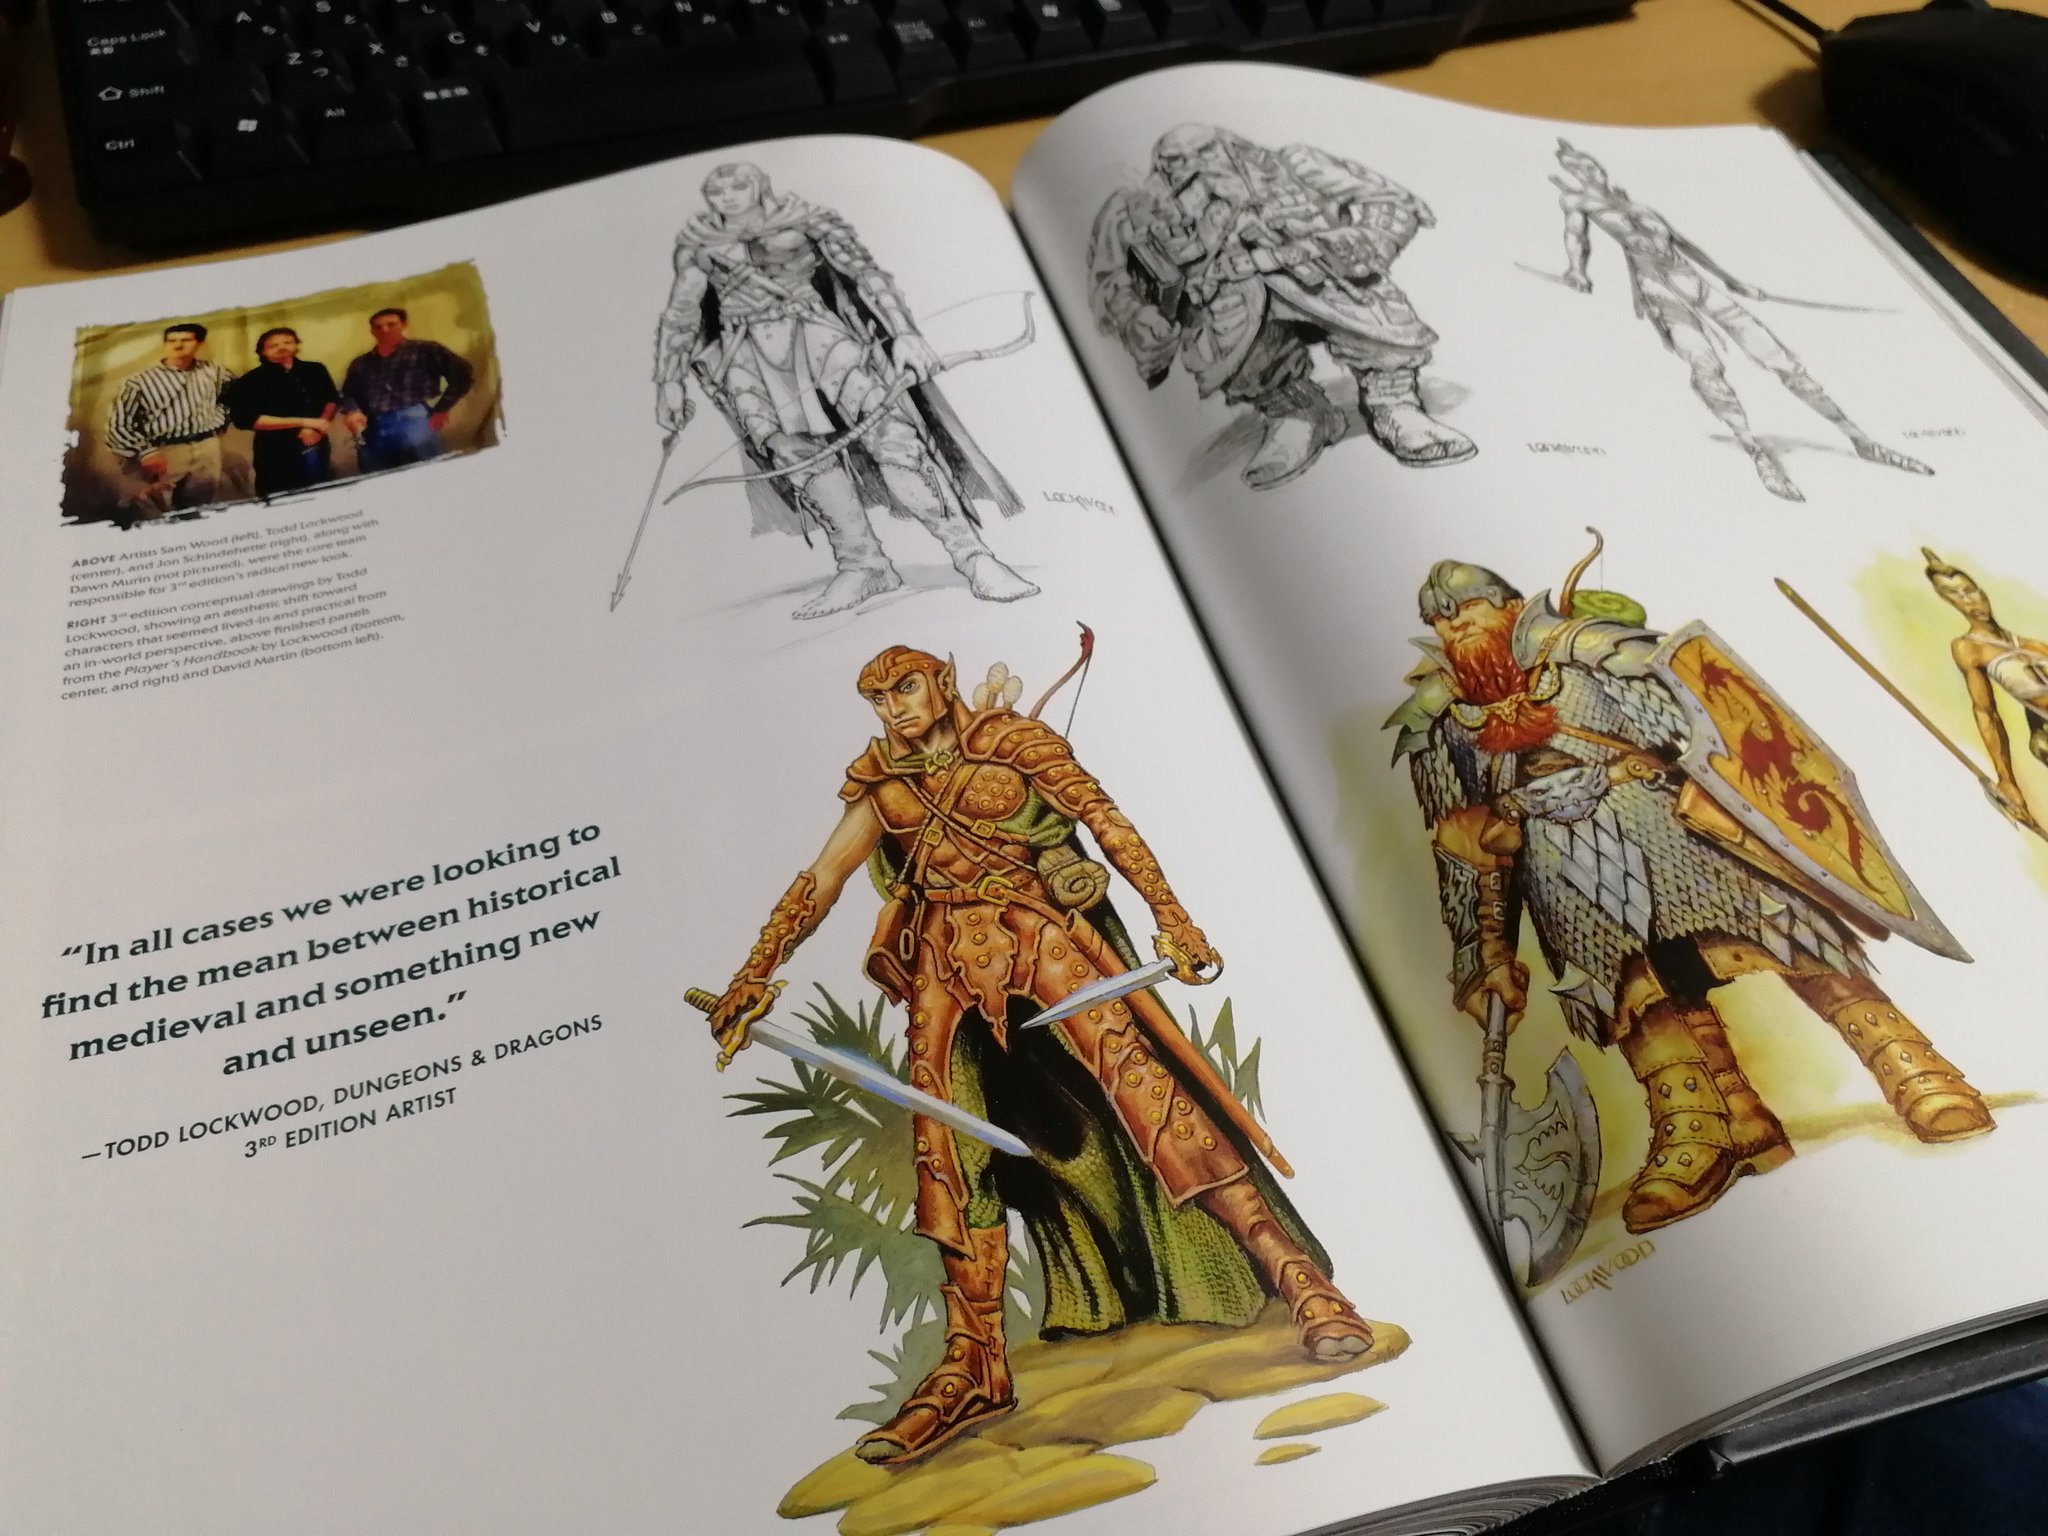 Felipe Pepe on Twitter: "I still remember saving all my money to buy  D&amp;D 3rd Edition Player's Handbook back in 2001... It was a school trip  to a book fair (Bienal do